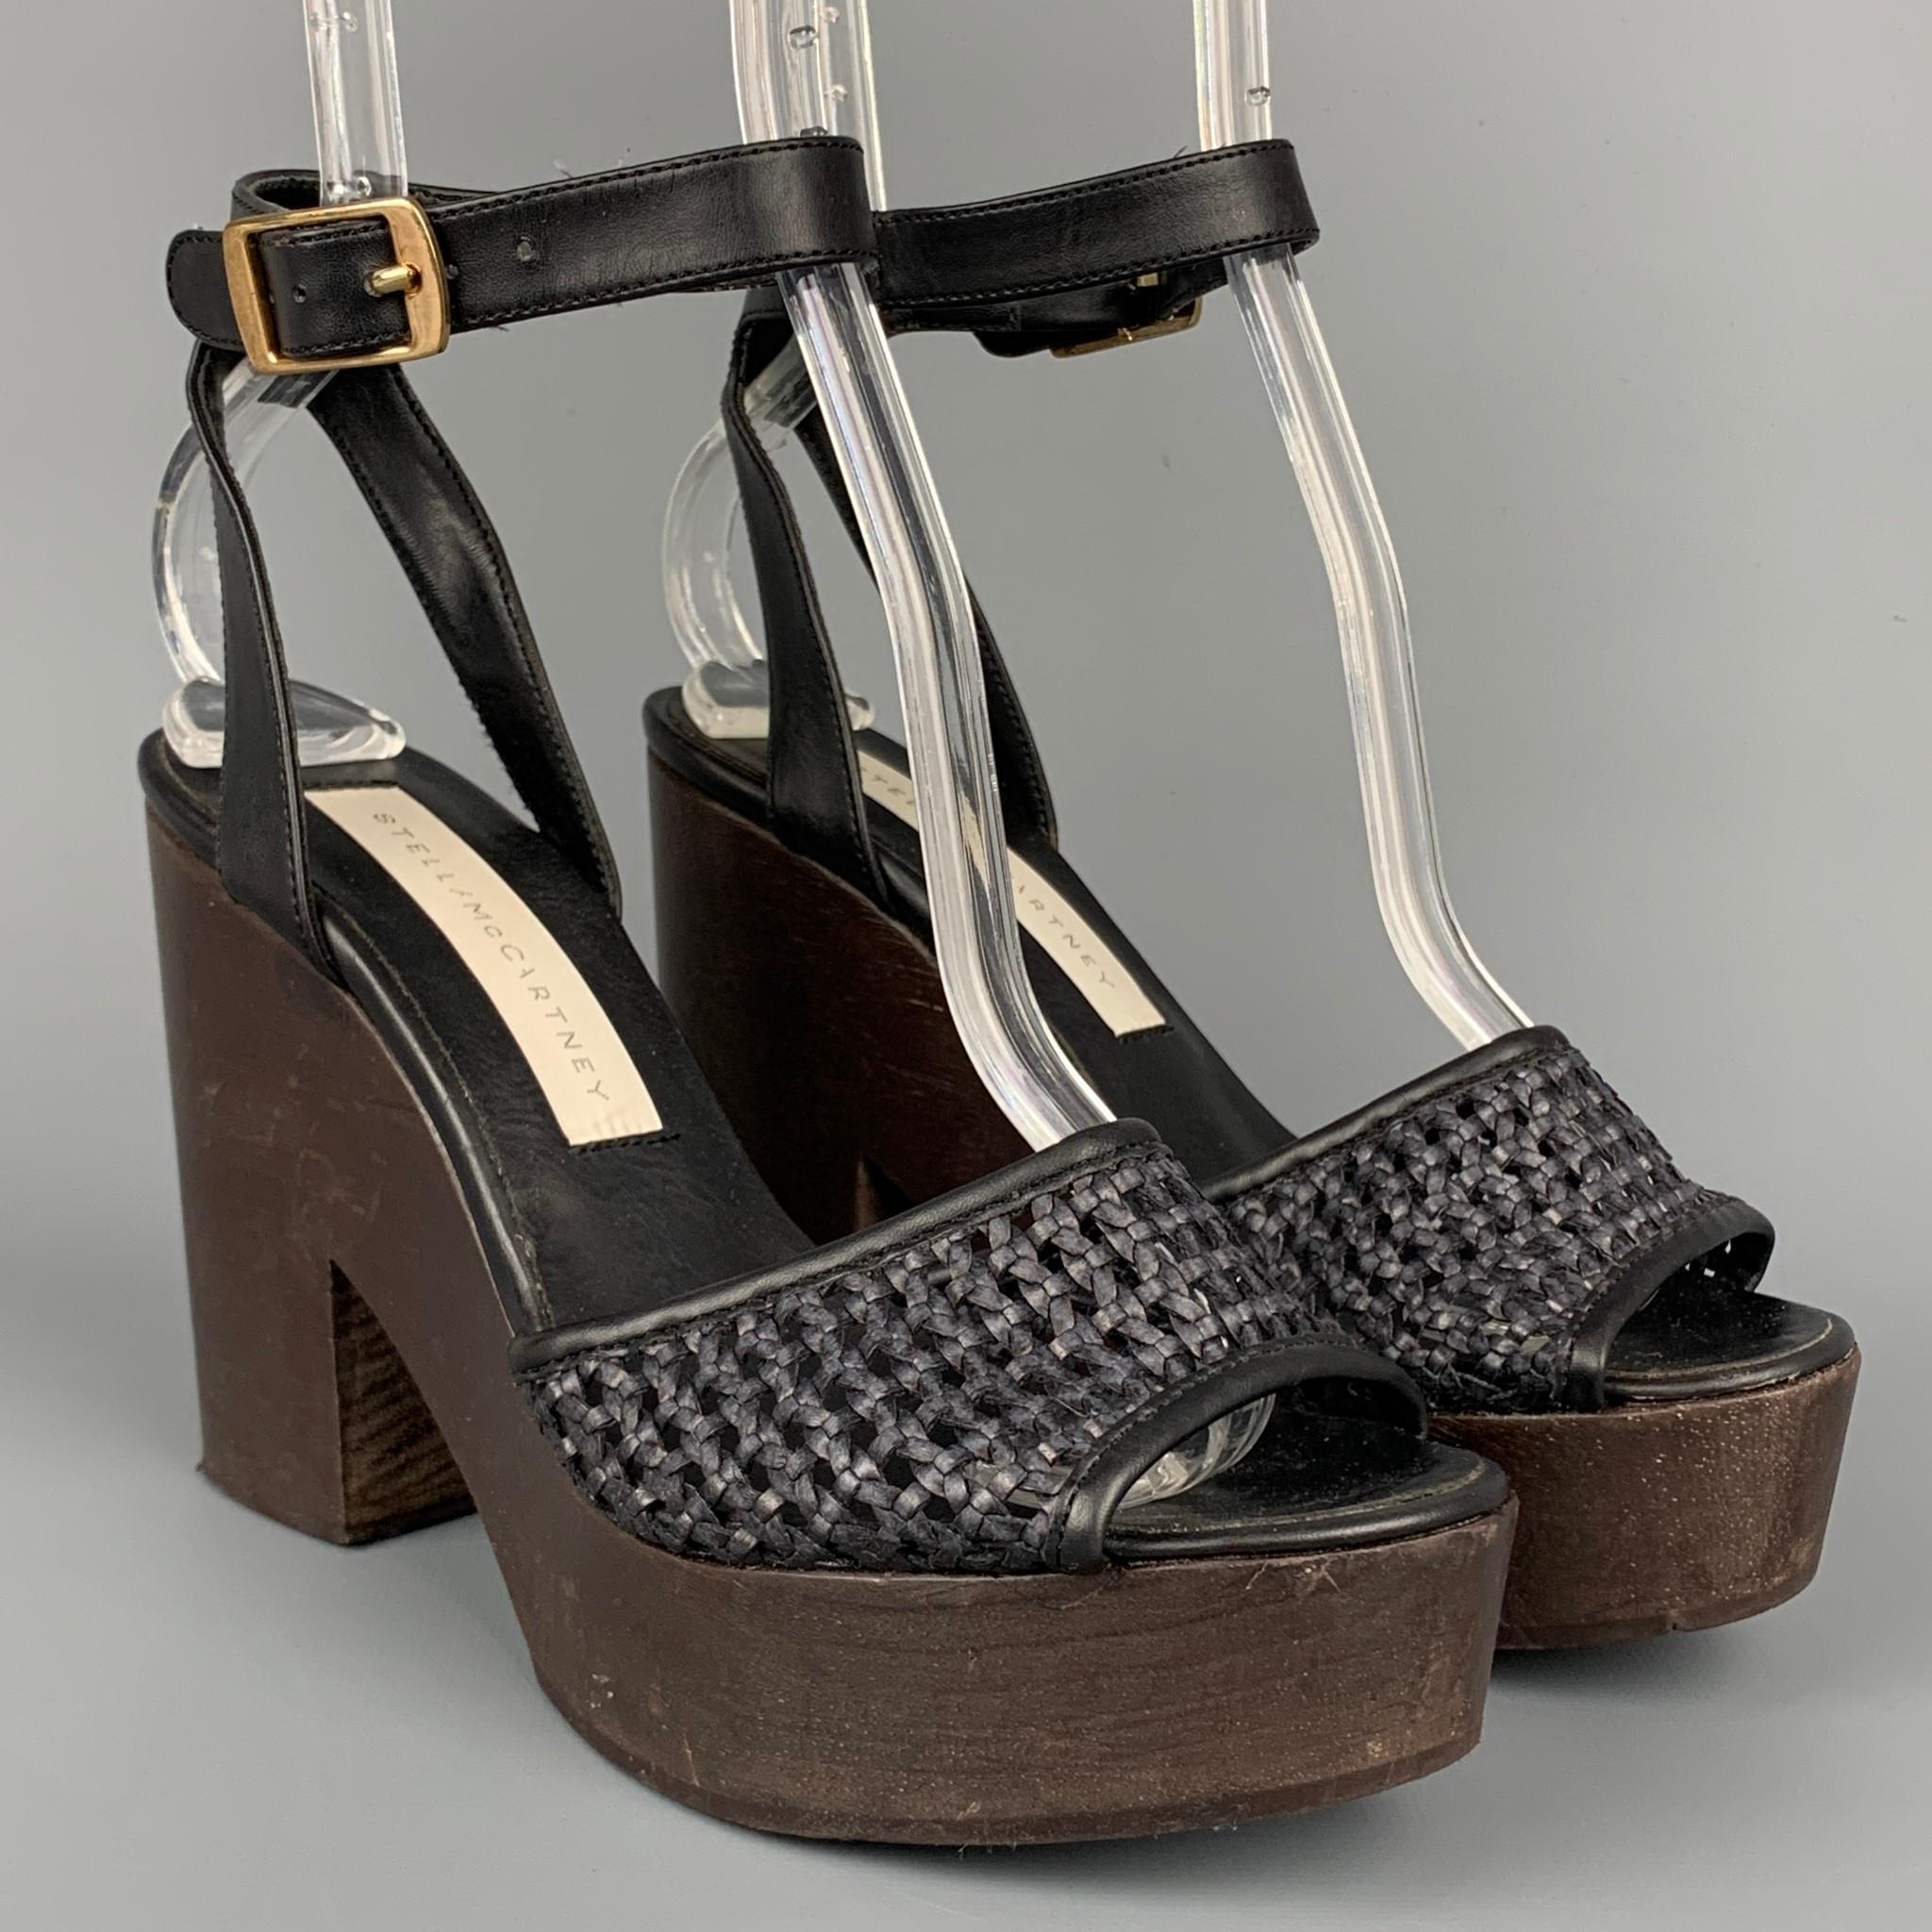 STELLA McCARTNEY sandals comes in a black & brown woven faux leather featuring a platform style, ankle strap, and a chunky heel. Made in Spain.

Very Good Pre-Owned Condition.
Marked: 36

Measurements:

Heel: 4.25 in.
Platform: 1 in. 